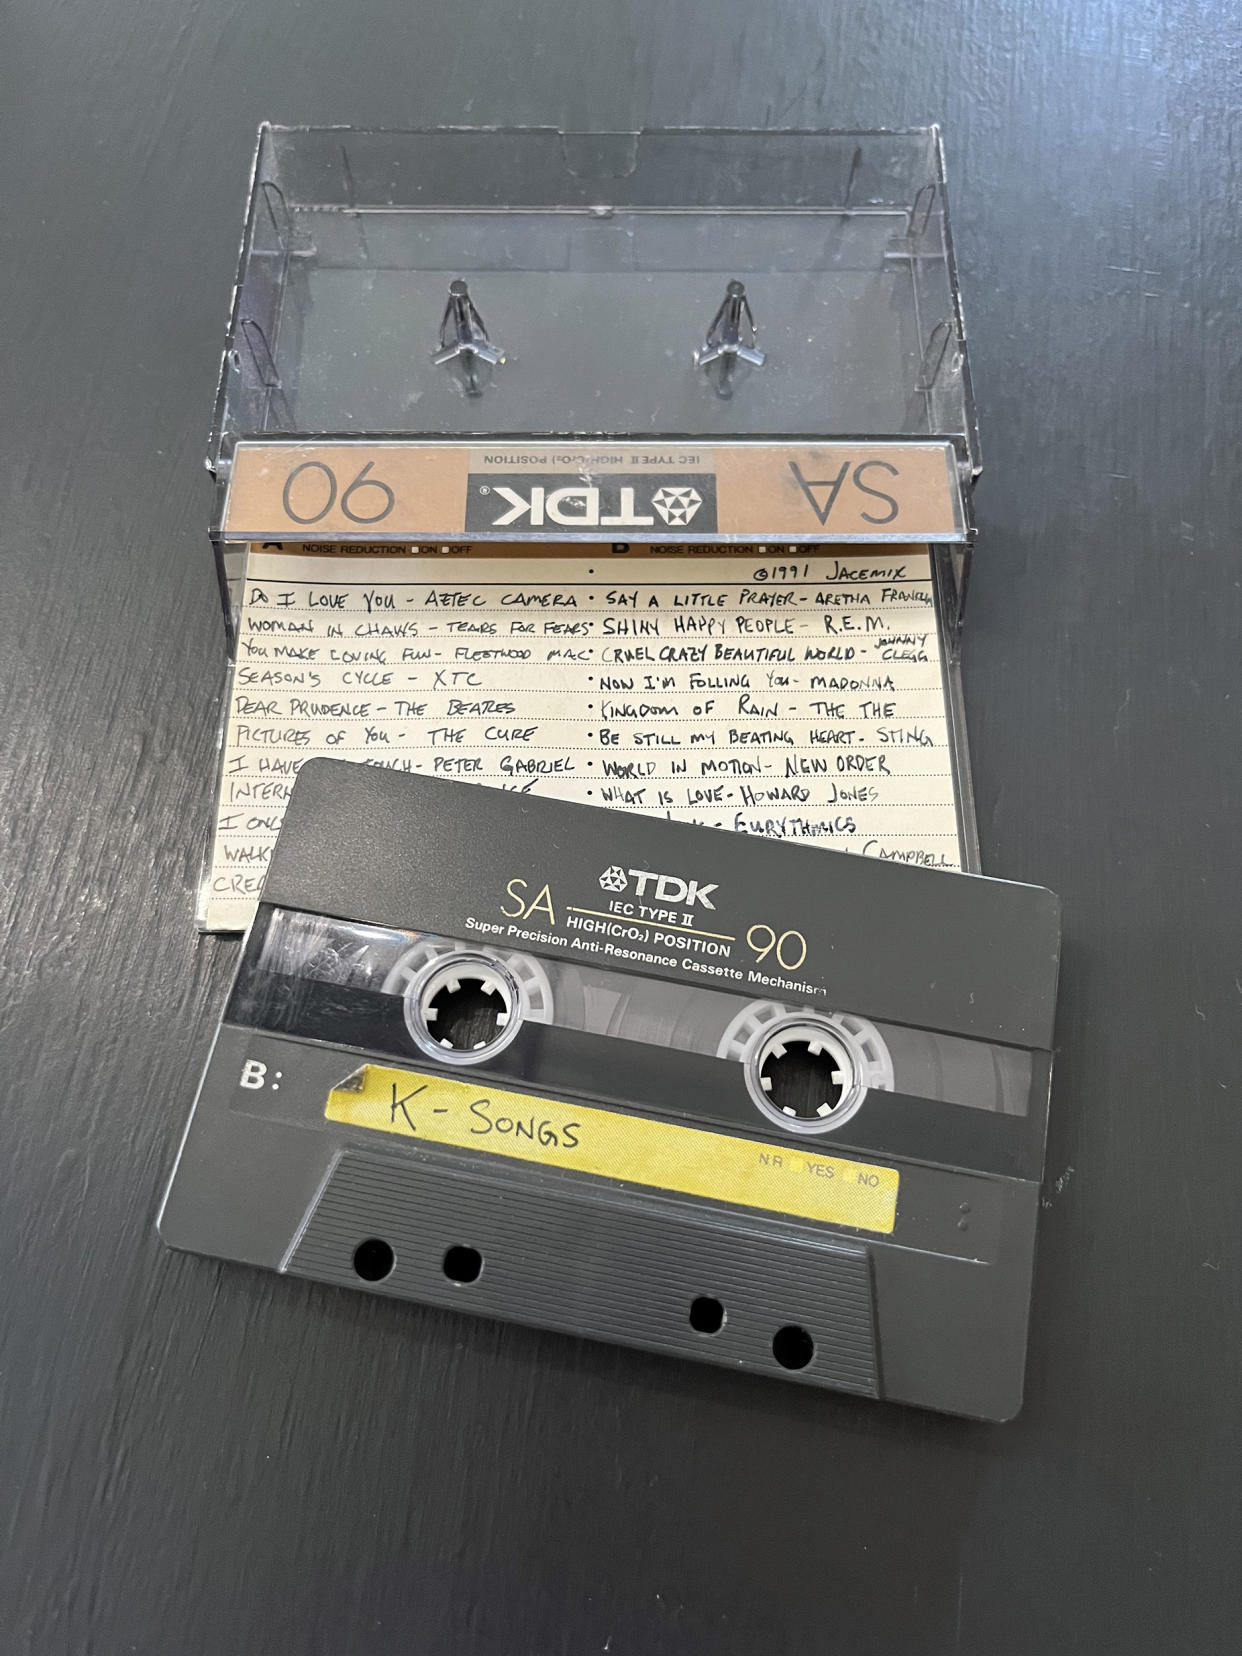 Part of my graduation present from Jason was a thoughtfully curated mixtape that told the story of our relationship through songs. (I still have it even though I don't have a cassette recorder to play it.)  (Courtesy Kavita Varma-White)